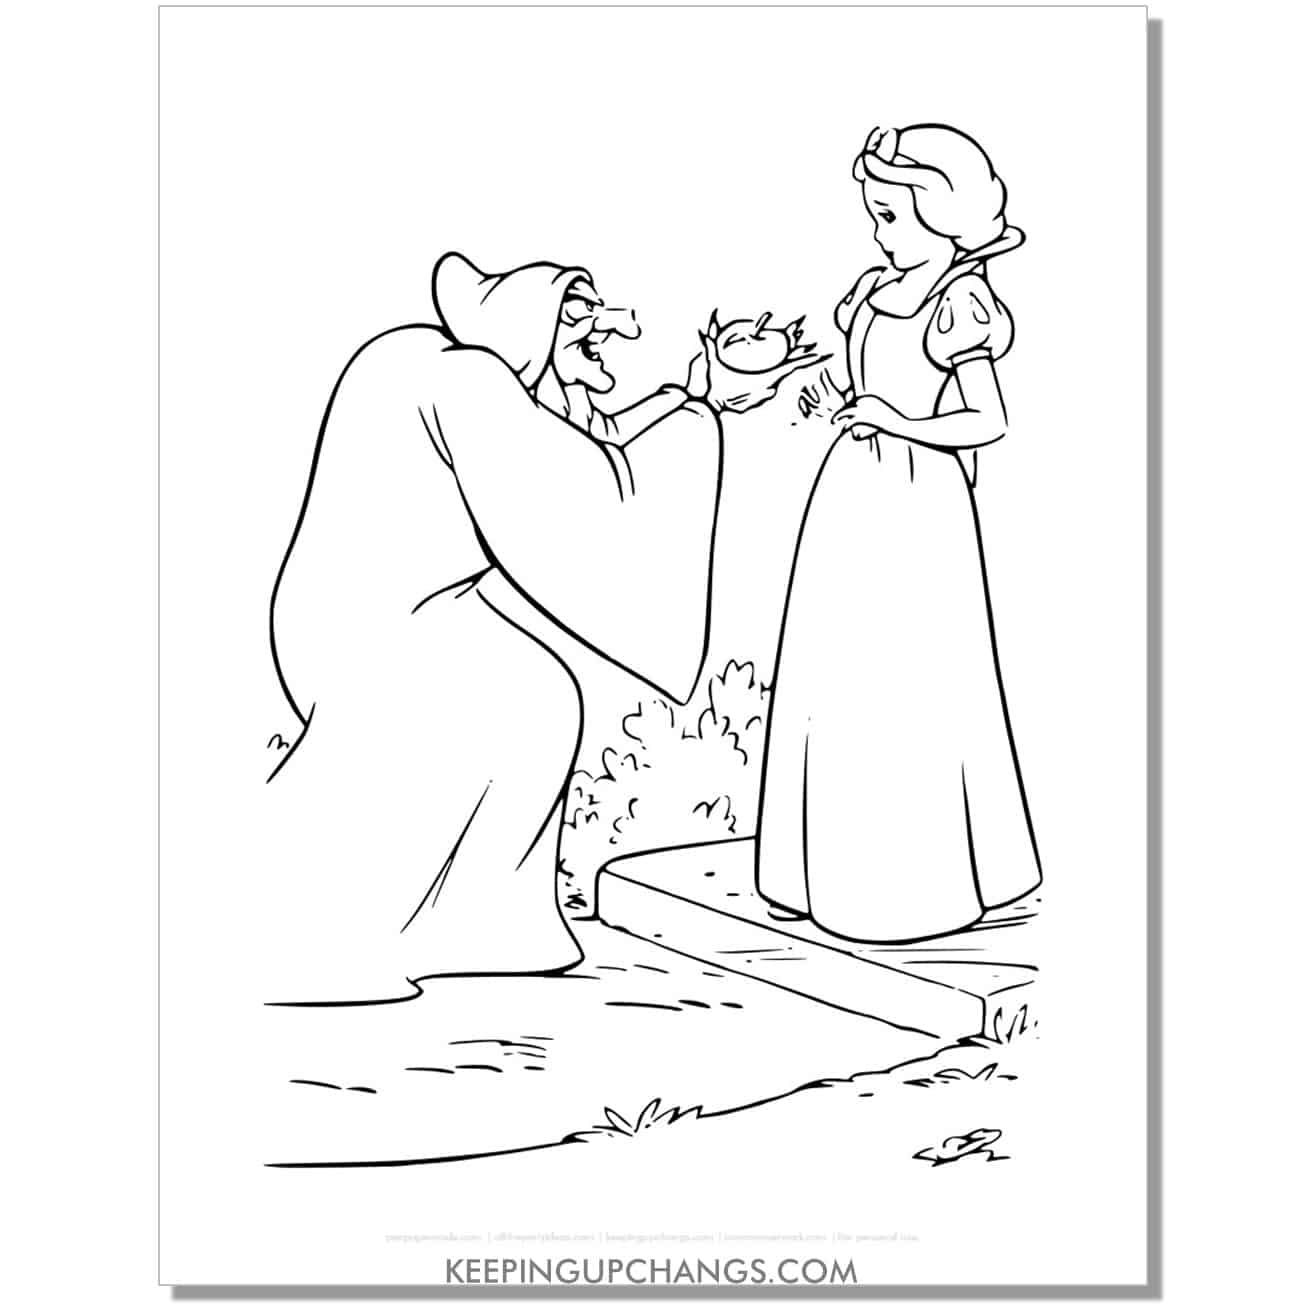 snow white being offered poison apple by witch coloring page, sheet.